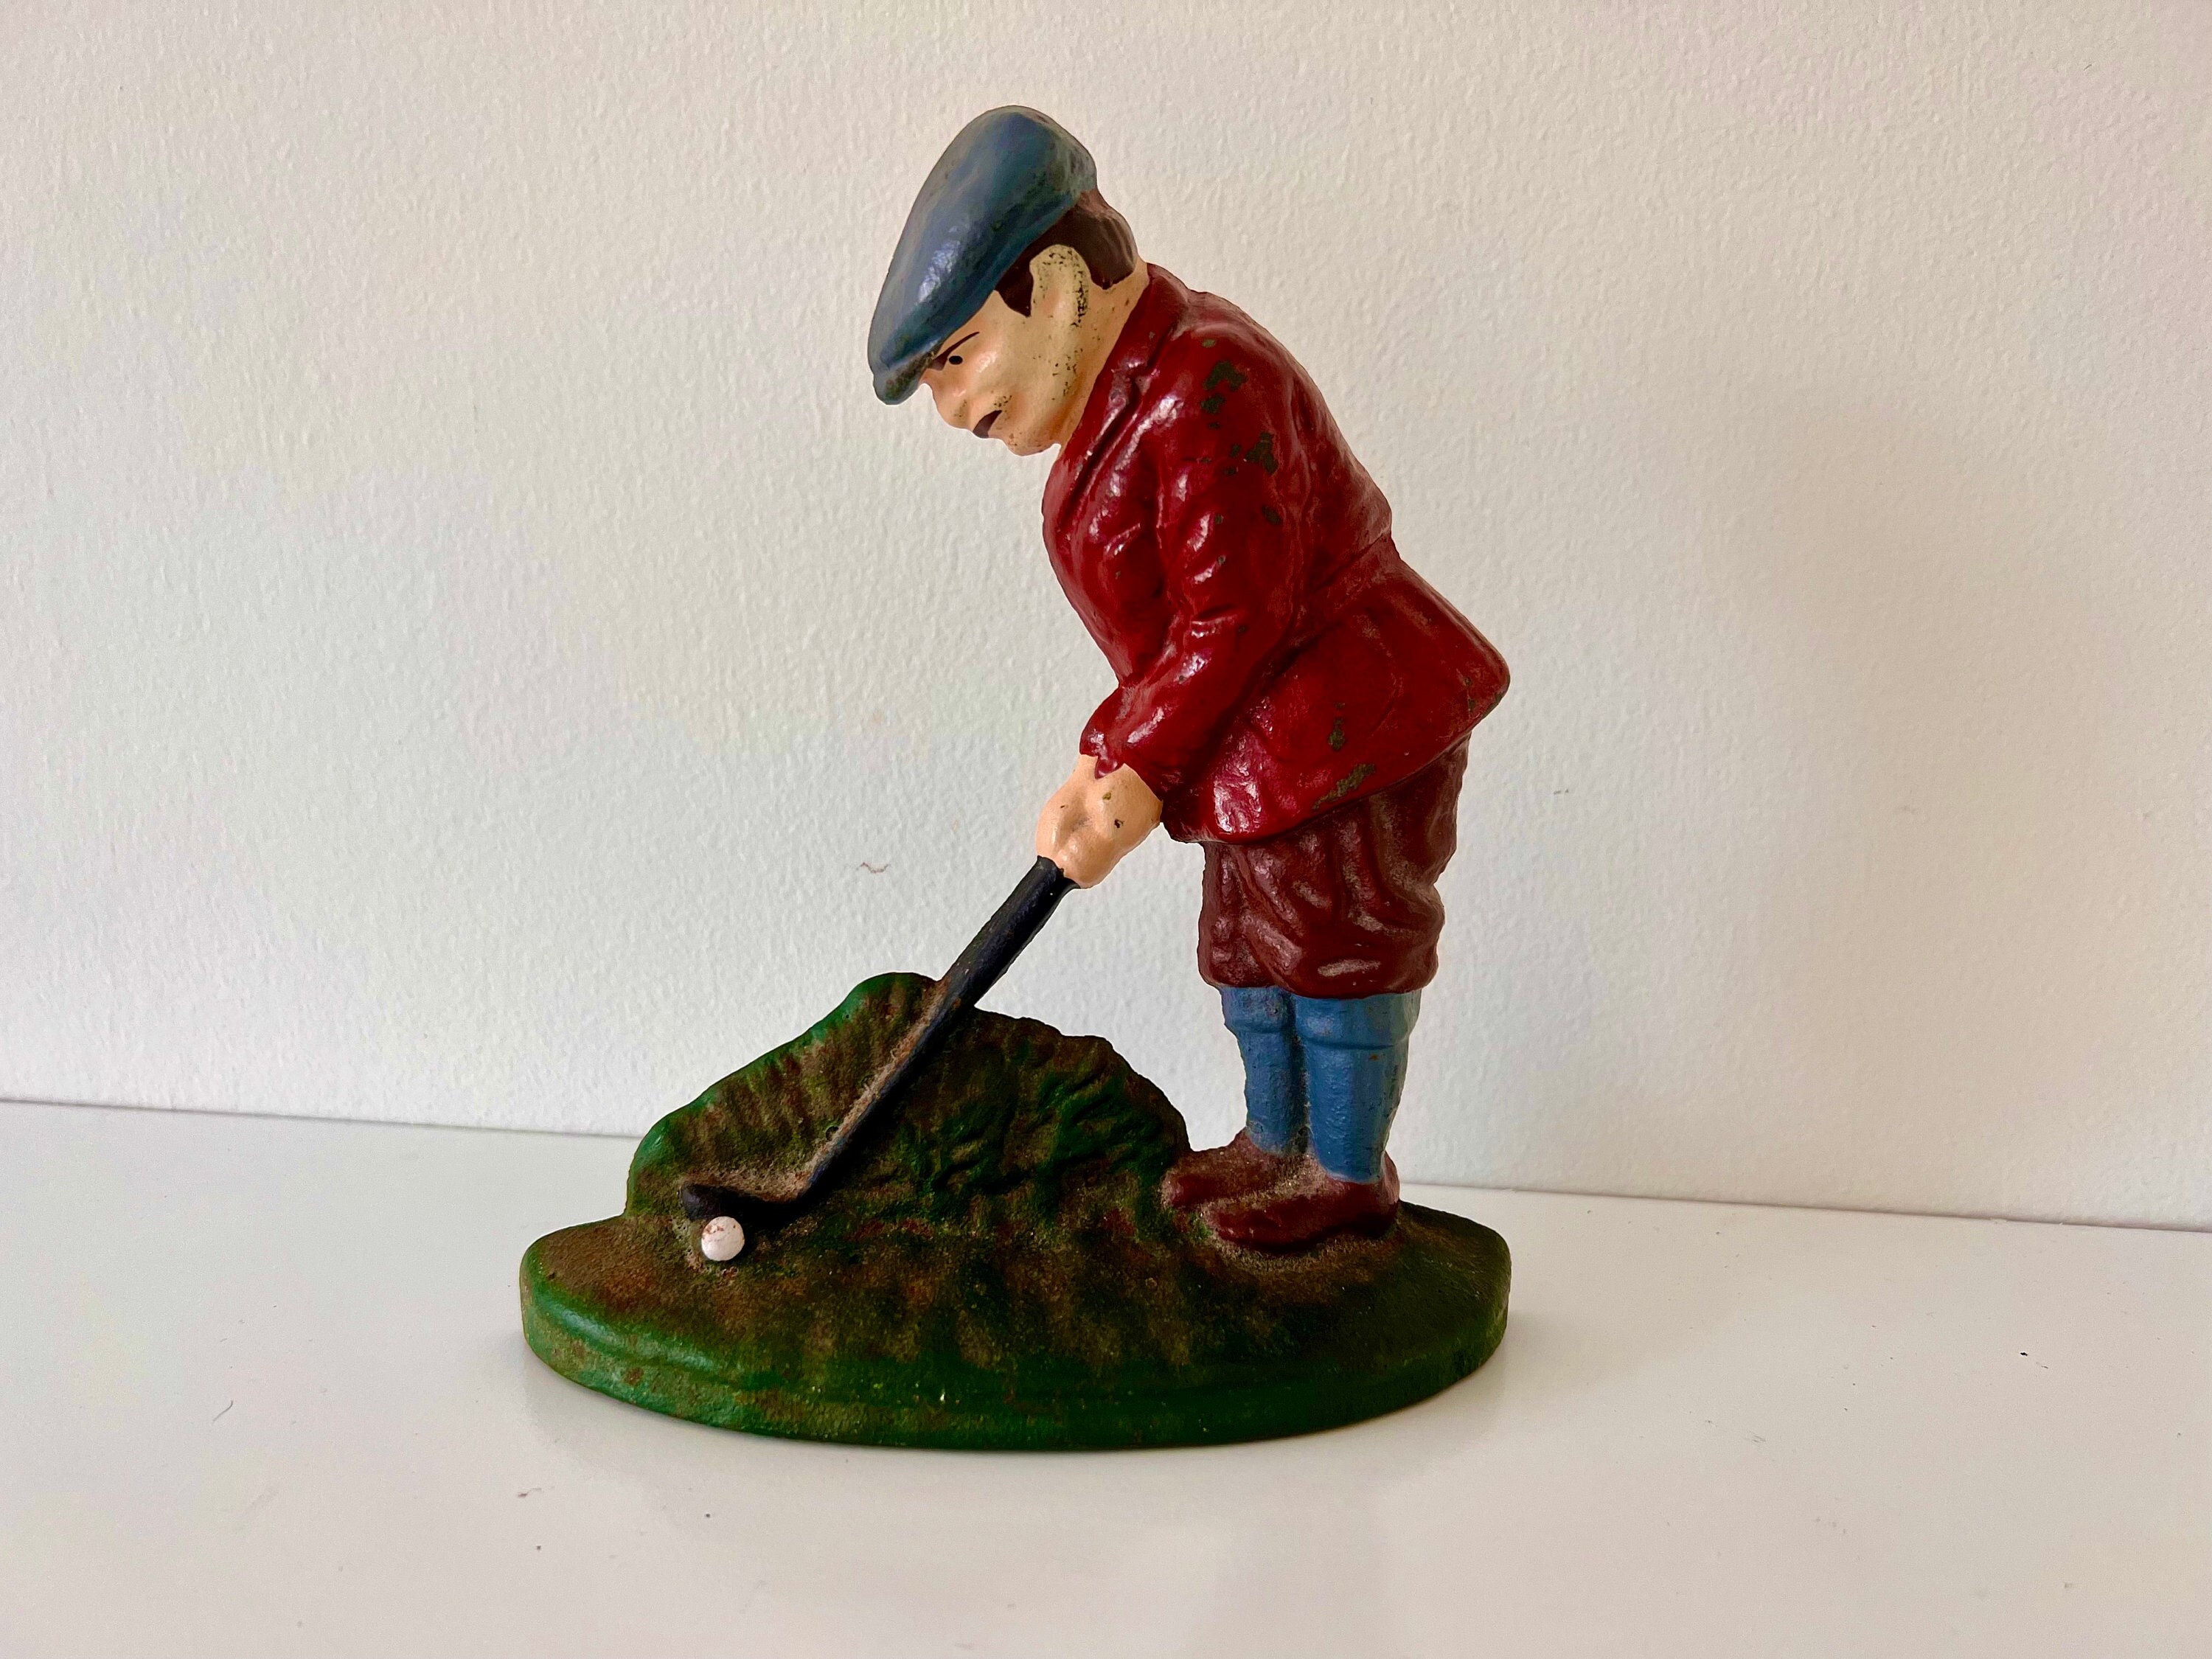 VINTAGE ANTIQUE GOLFER DOOR STOP/BOOKEND PLAYING GOLF SOLID HEAVY CAST IRON  8”